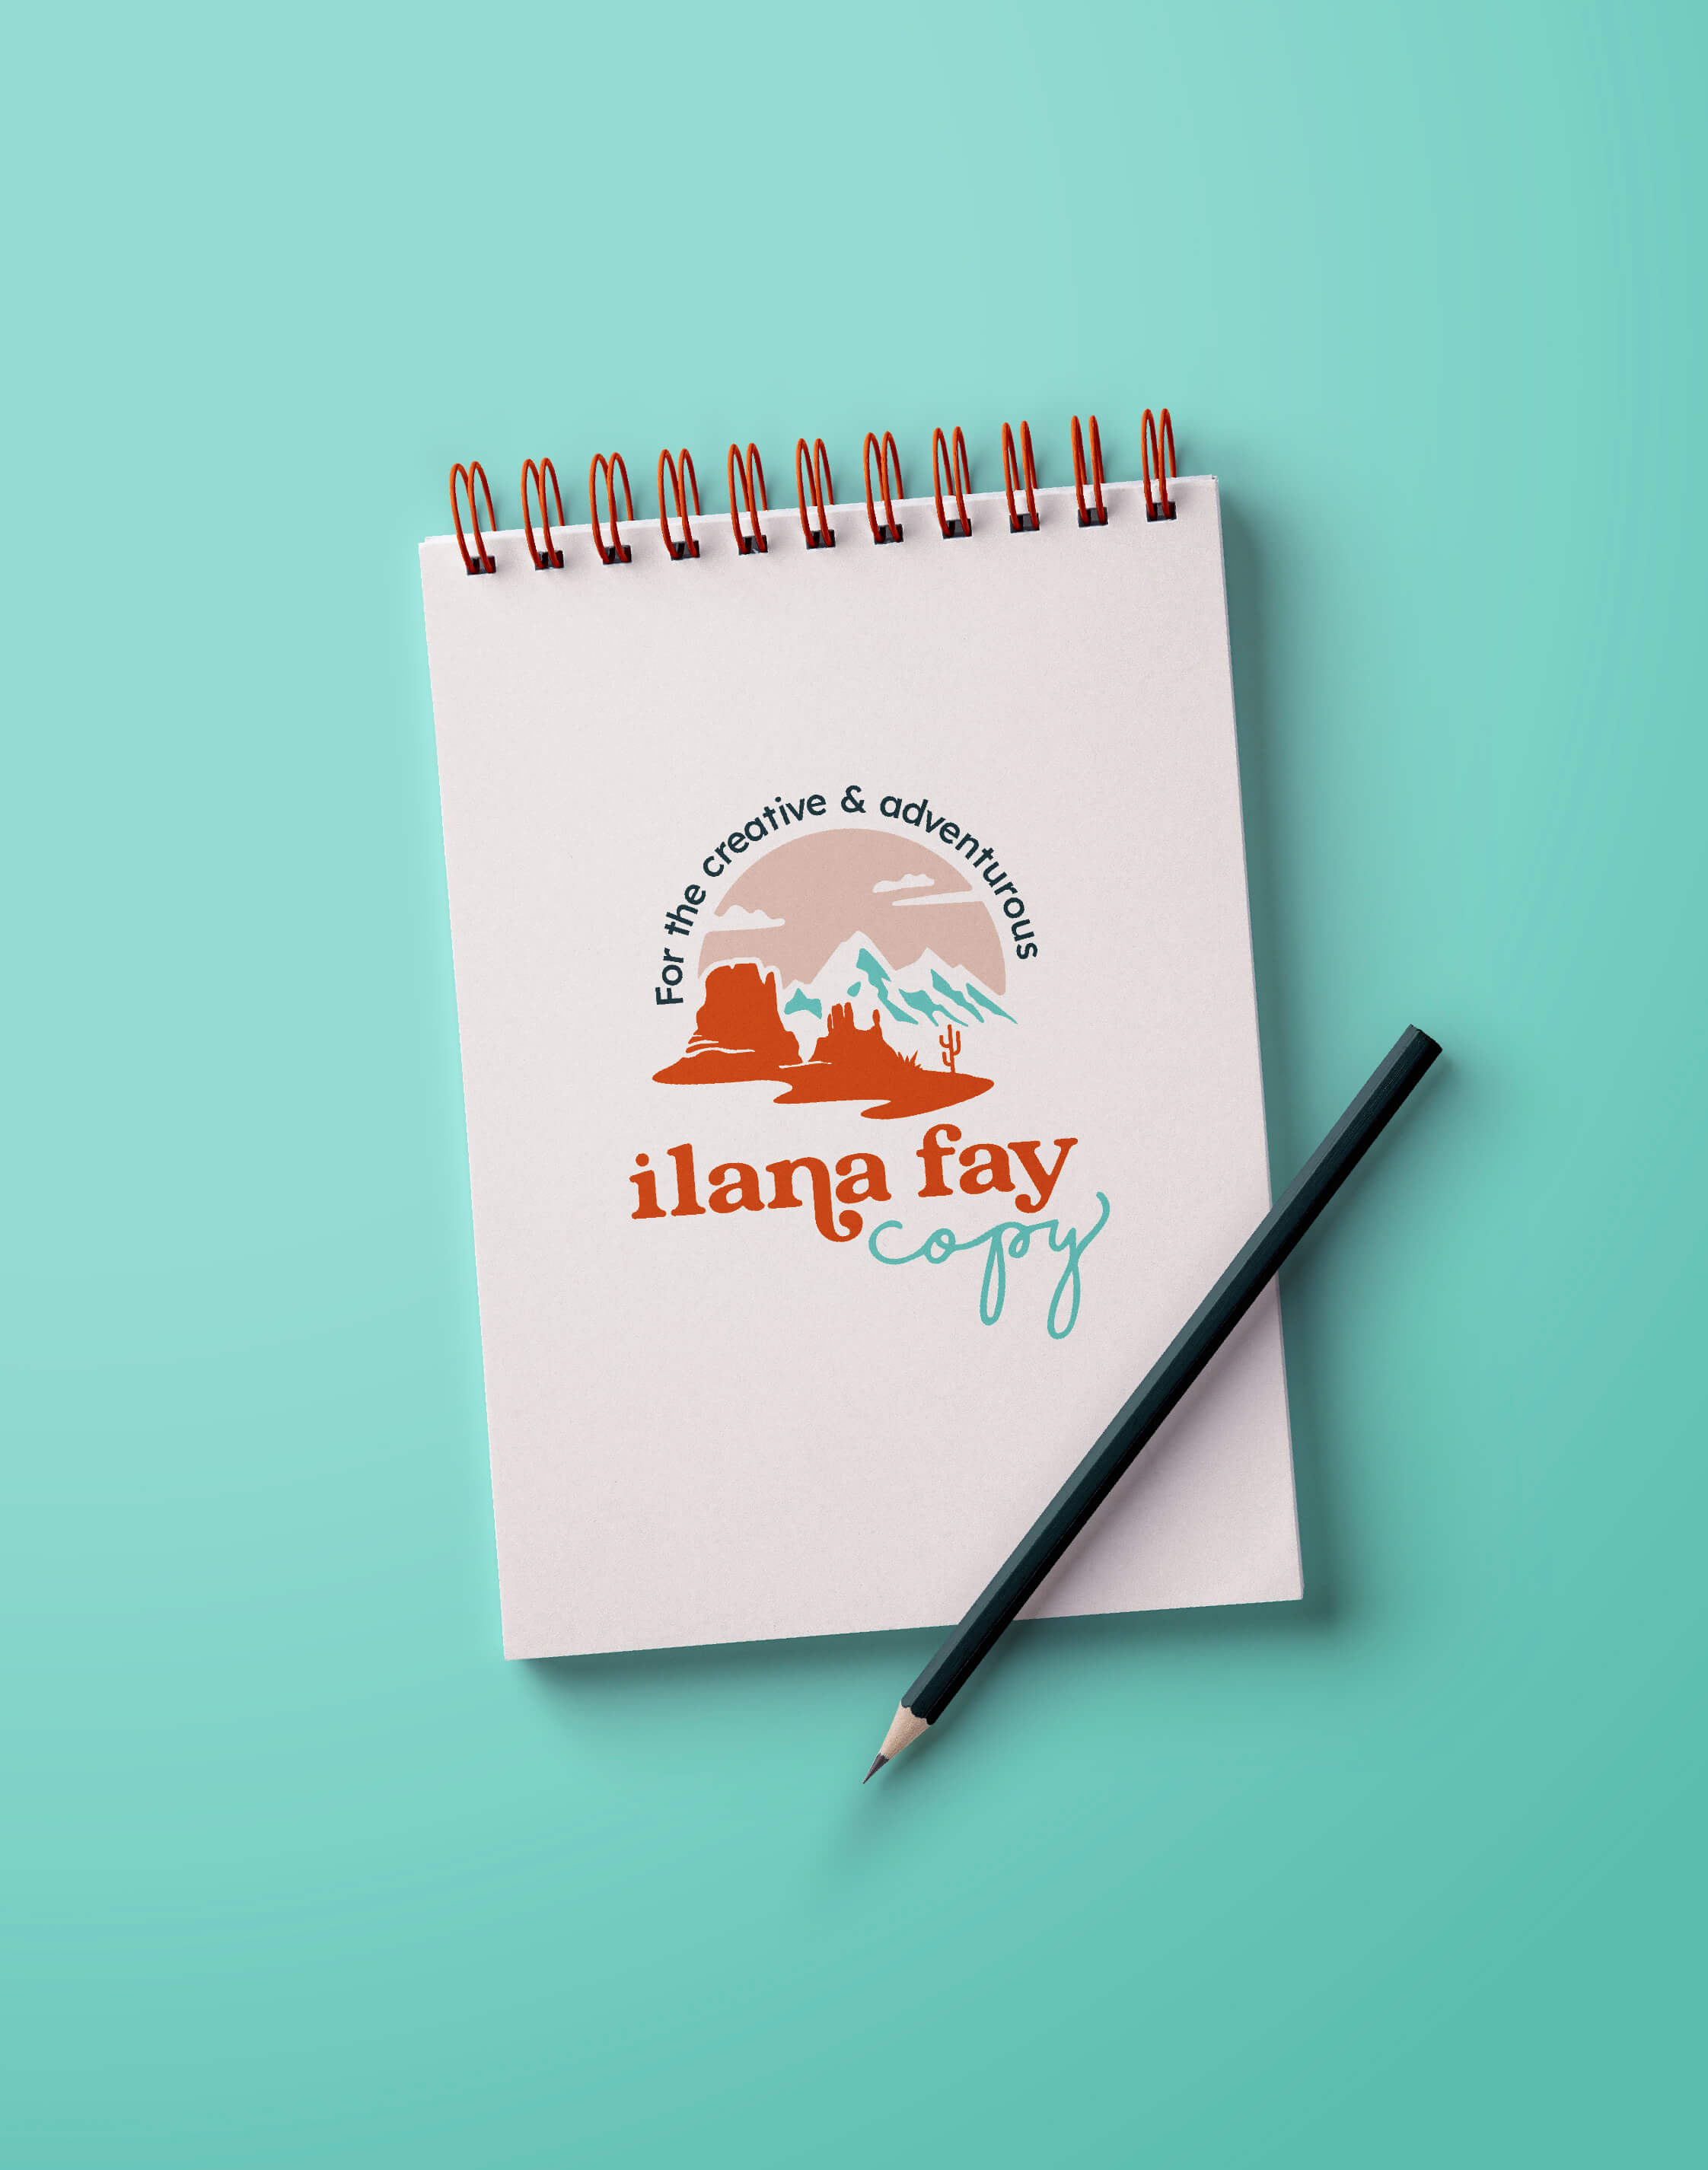 Ilana Fay Copy, copywriter for outdoors brand, graphic logo design for th creative and adventurous shown on a notepad with a pencil